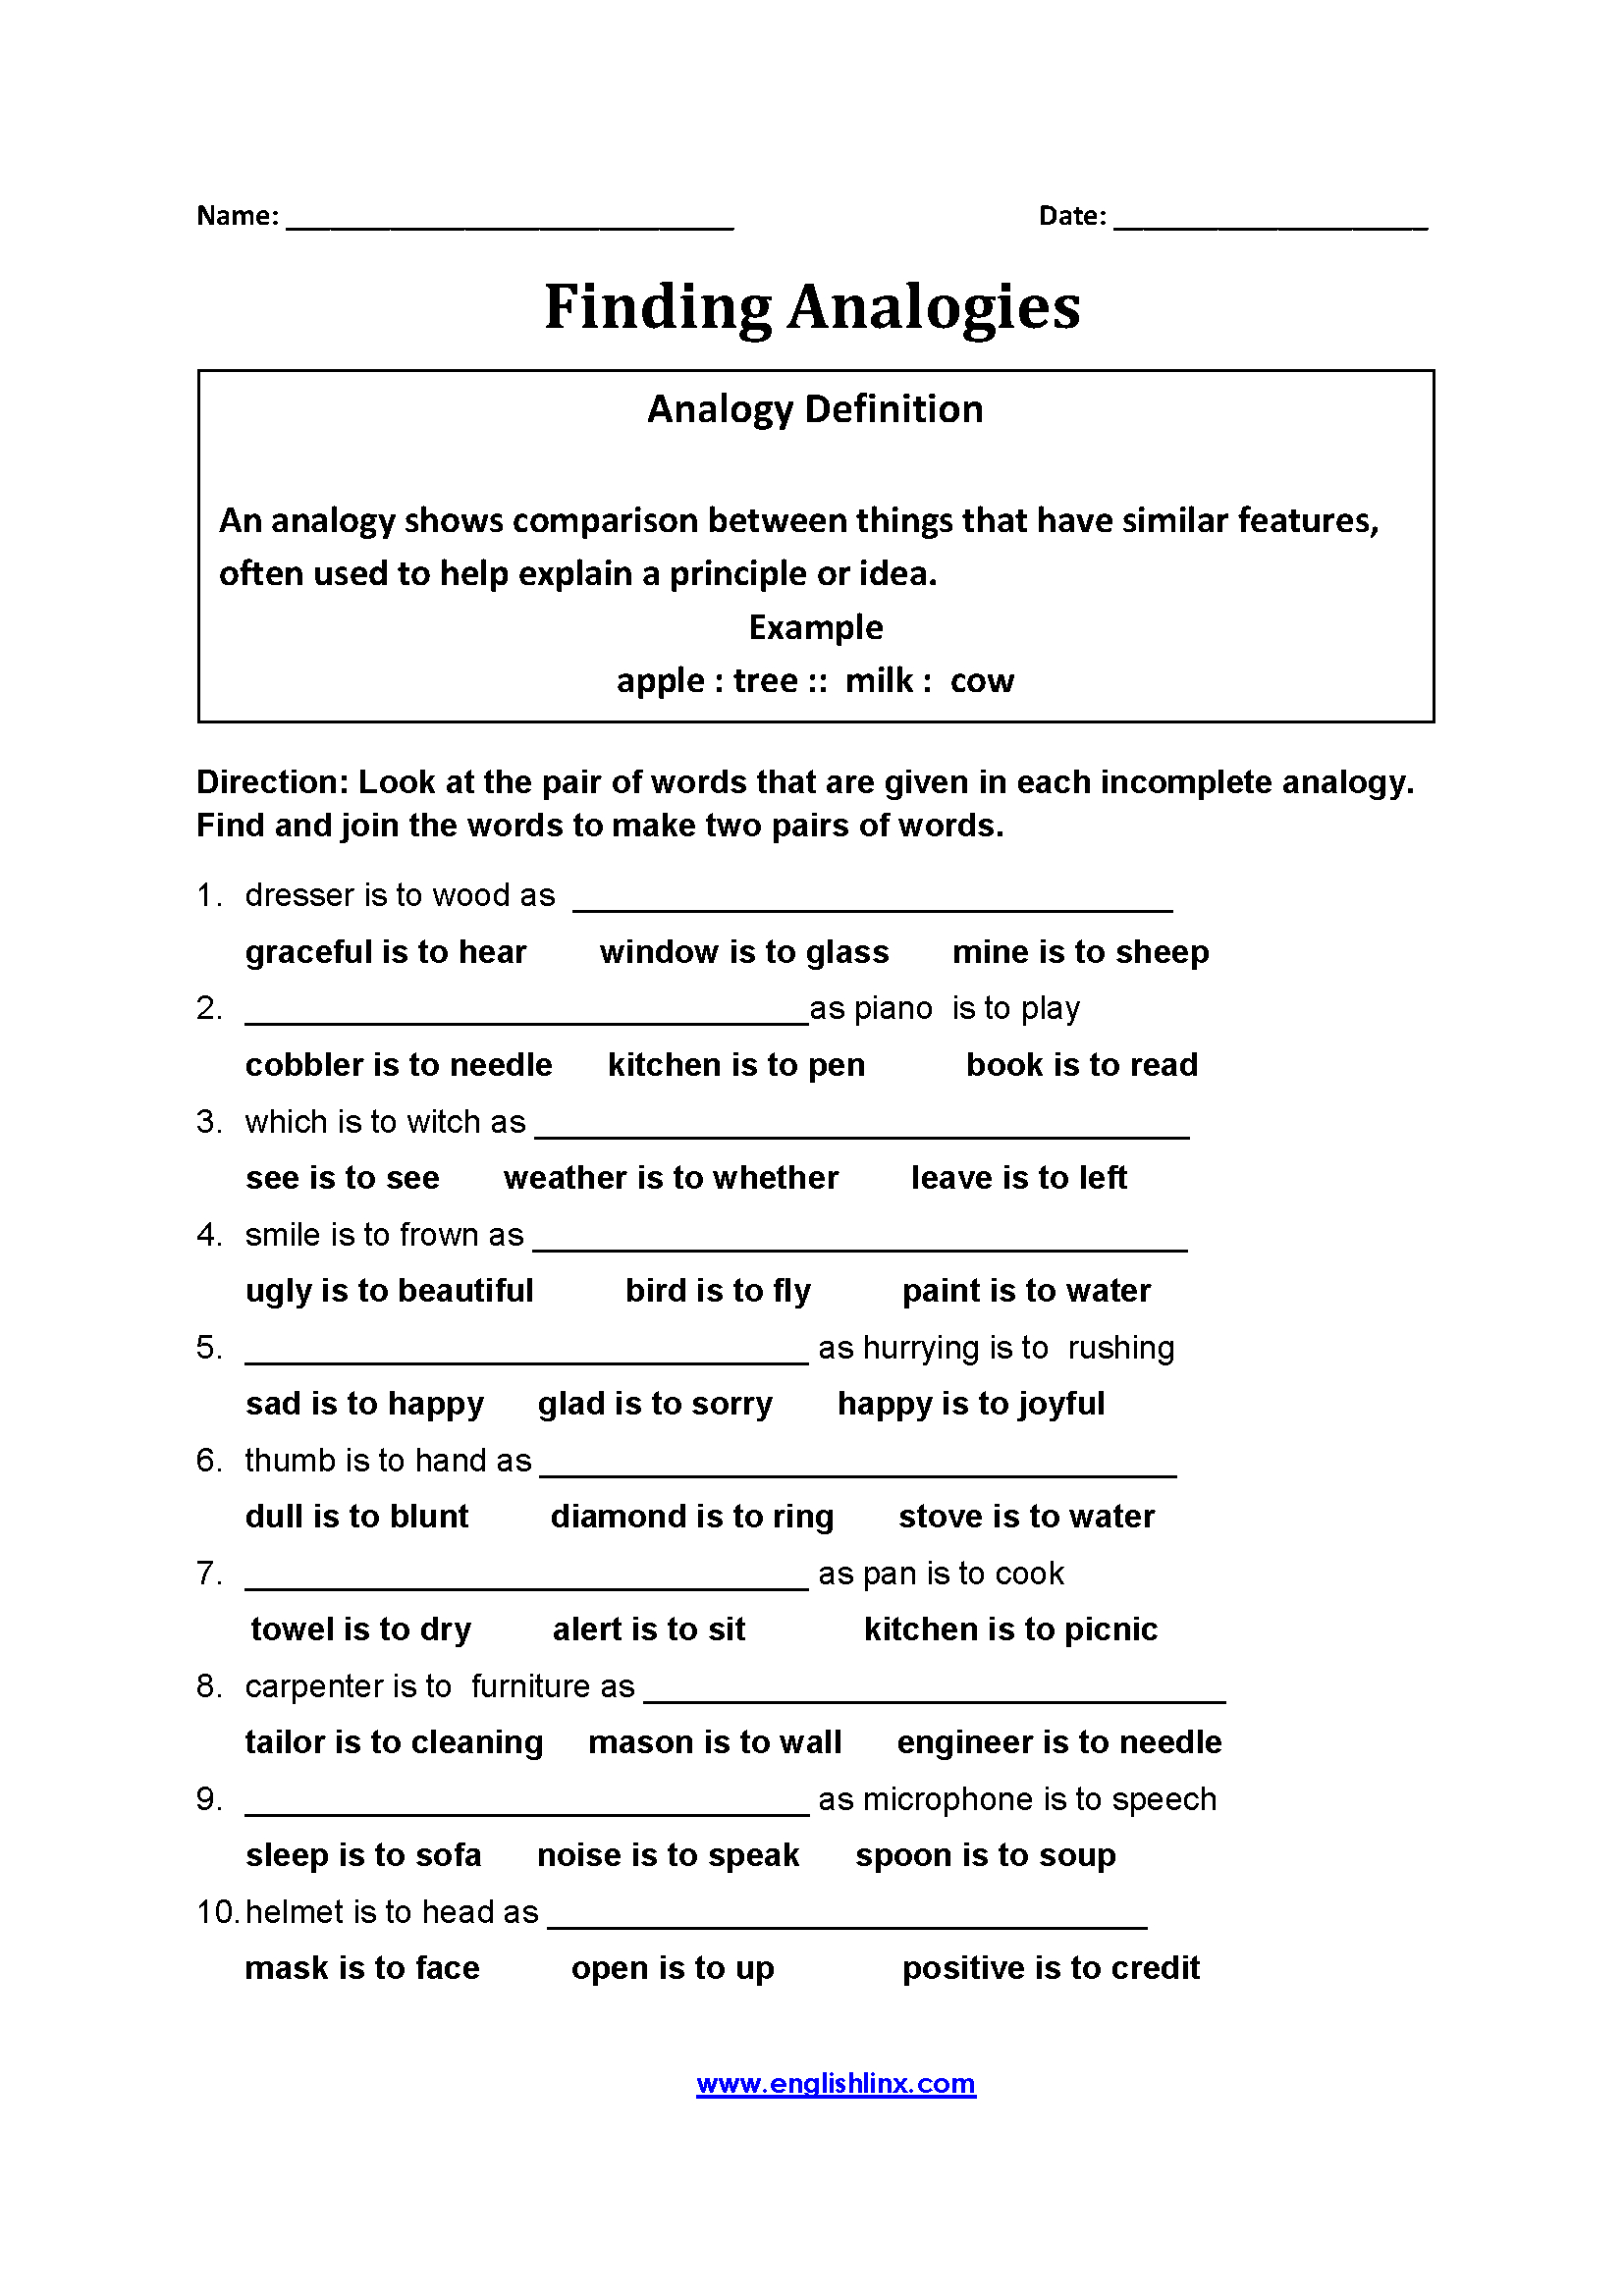 Analogy Worksheets For Middle School Printables Lexia s Blog